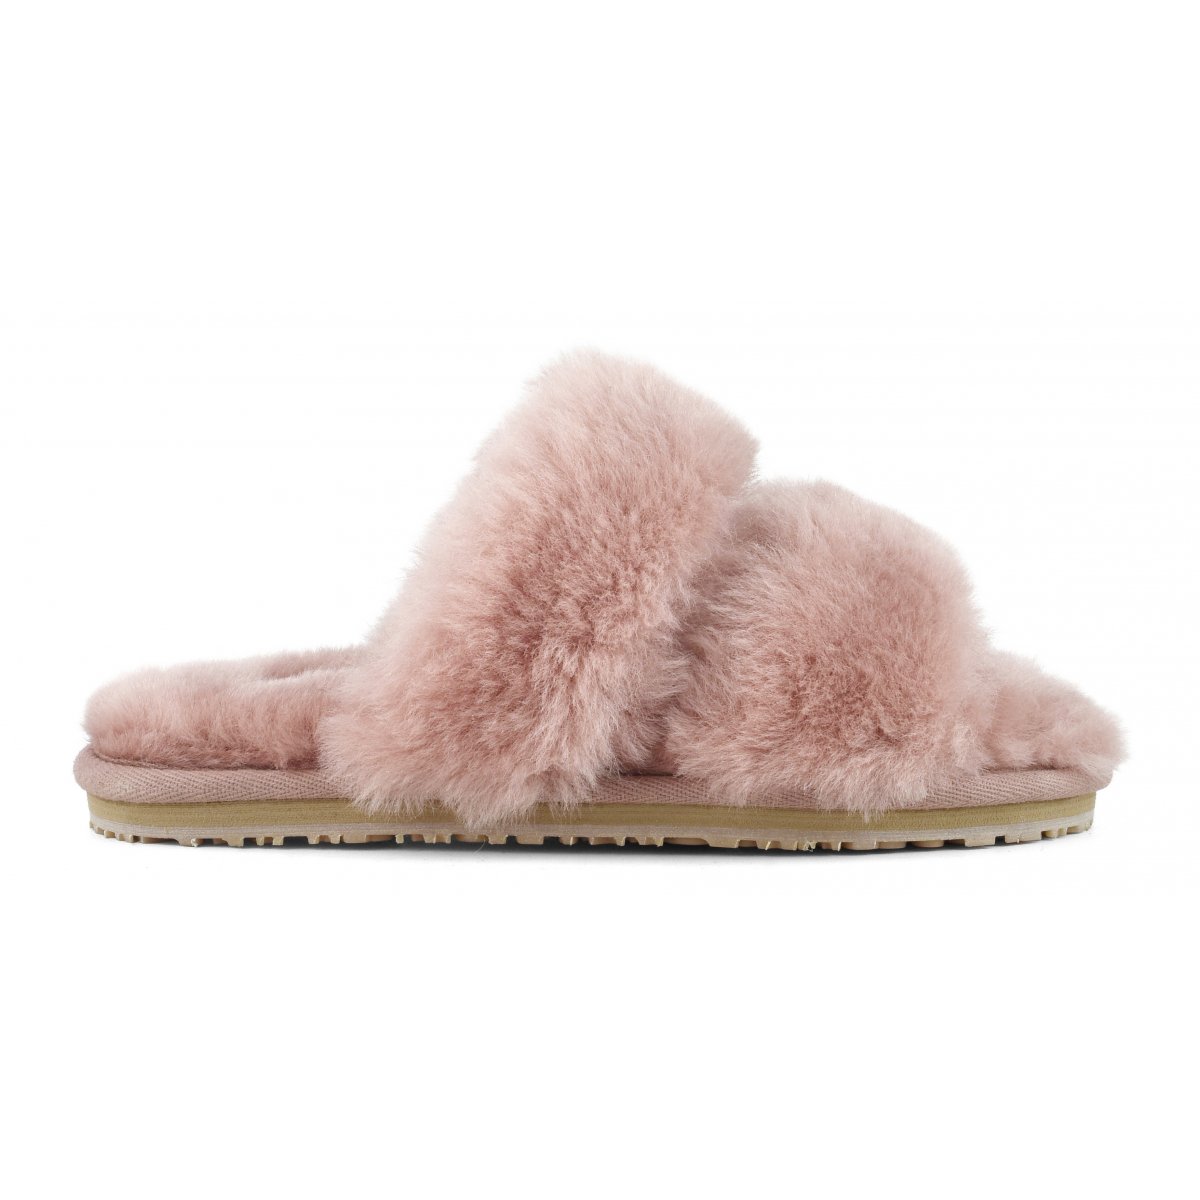 Open Toe Boots Medical Sheepskin Slippers Without Toes